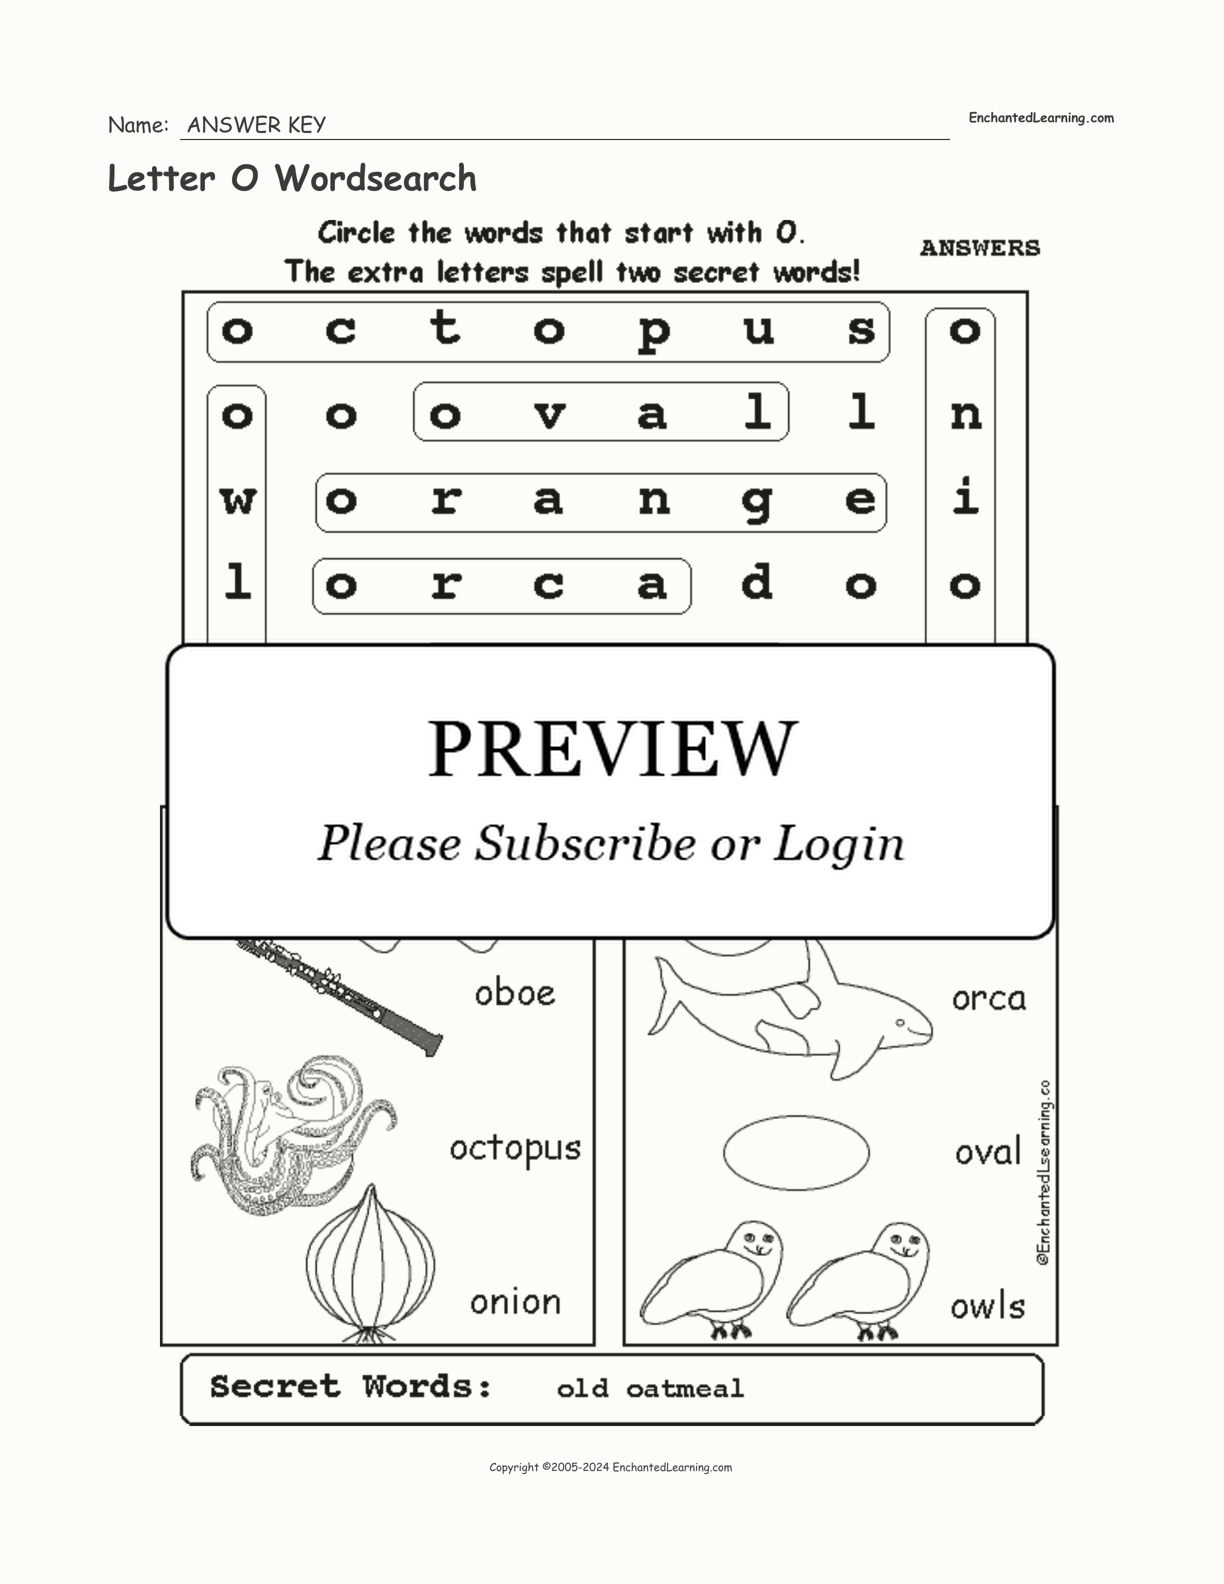 Letter O Wordsearch interactive worksheet page 2